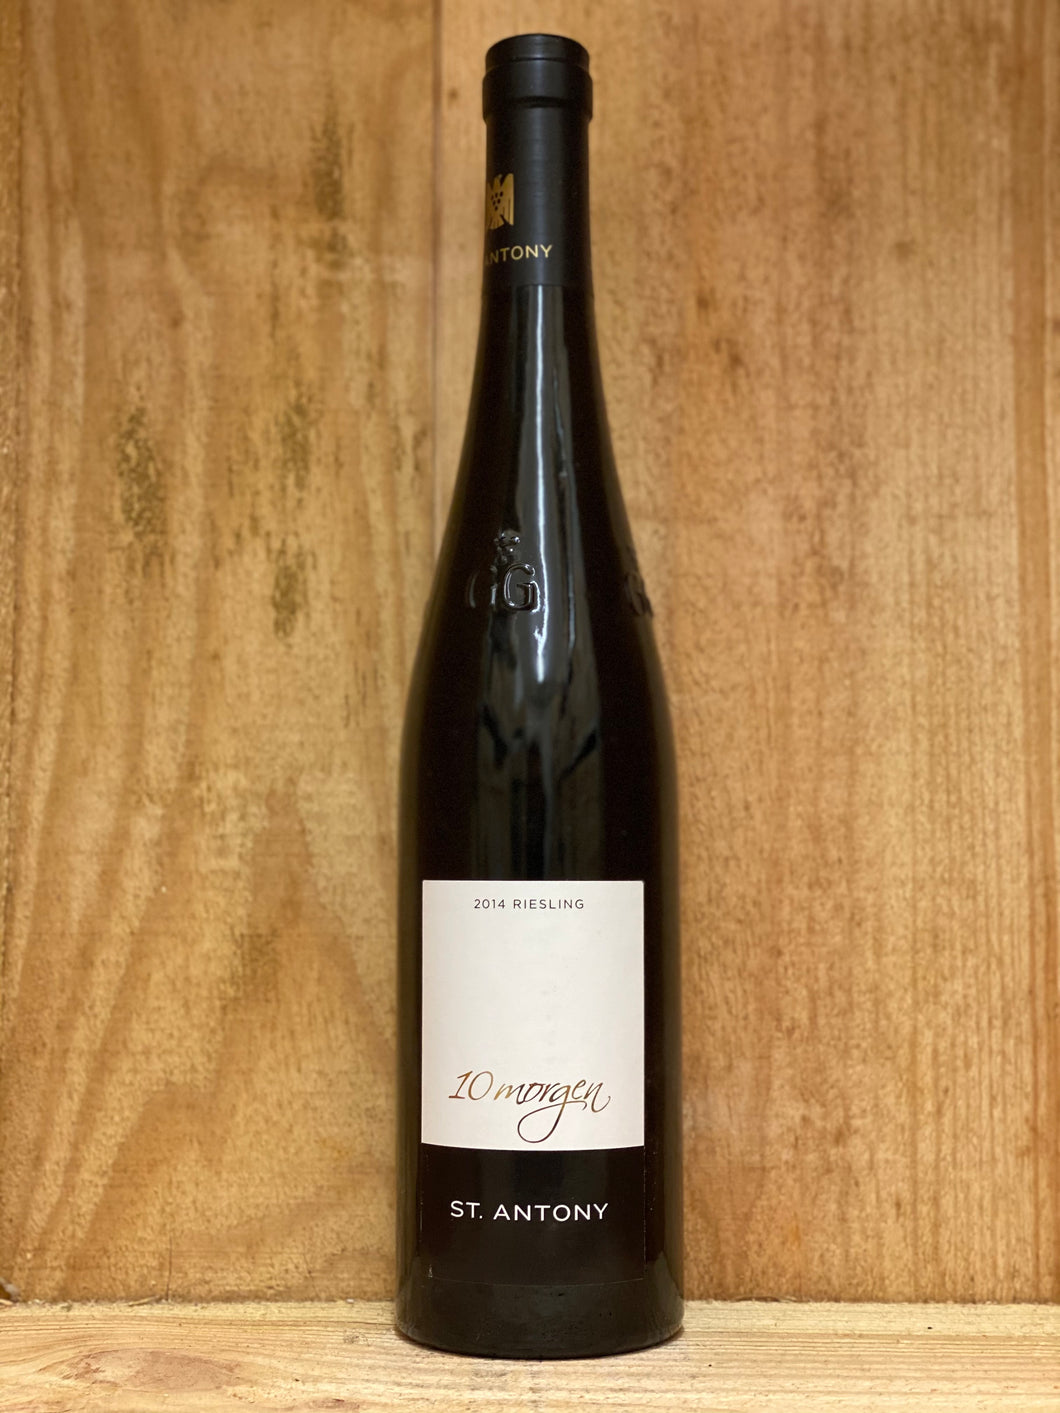 St. Anthony 2014 10morgen GG Riesling